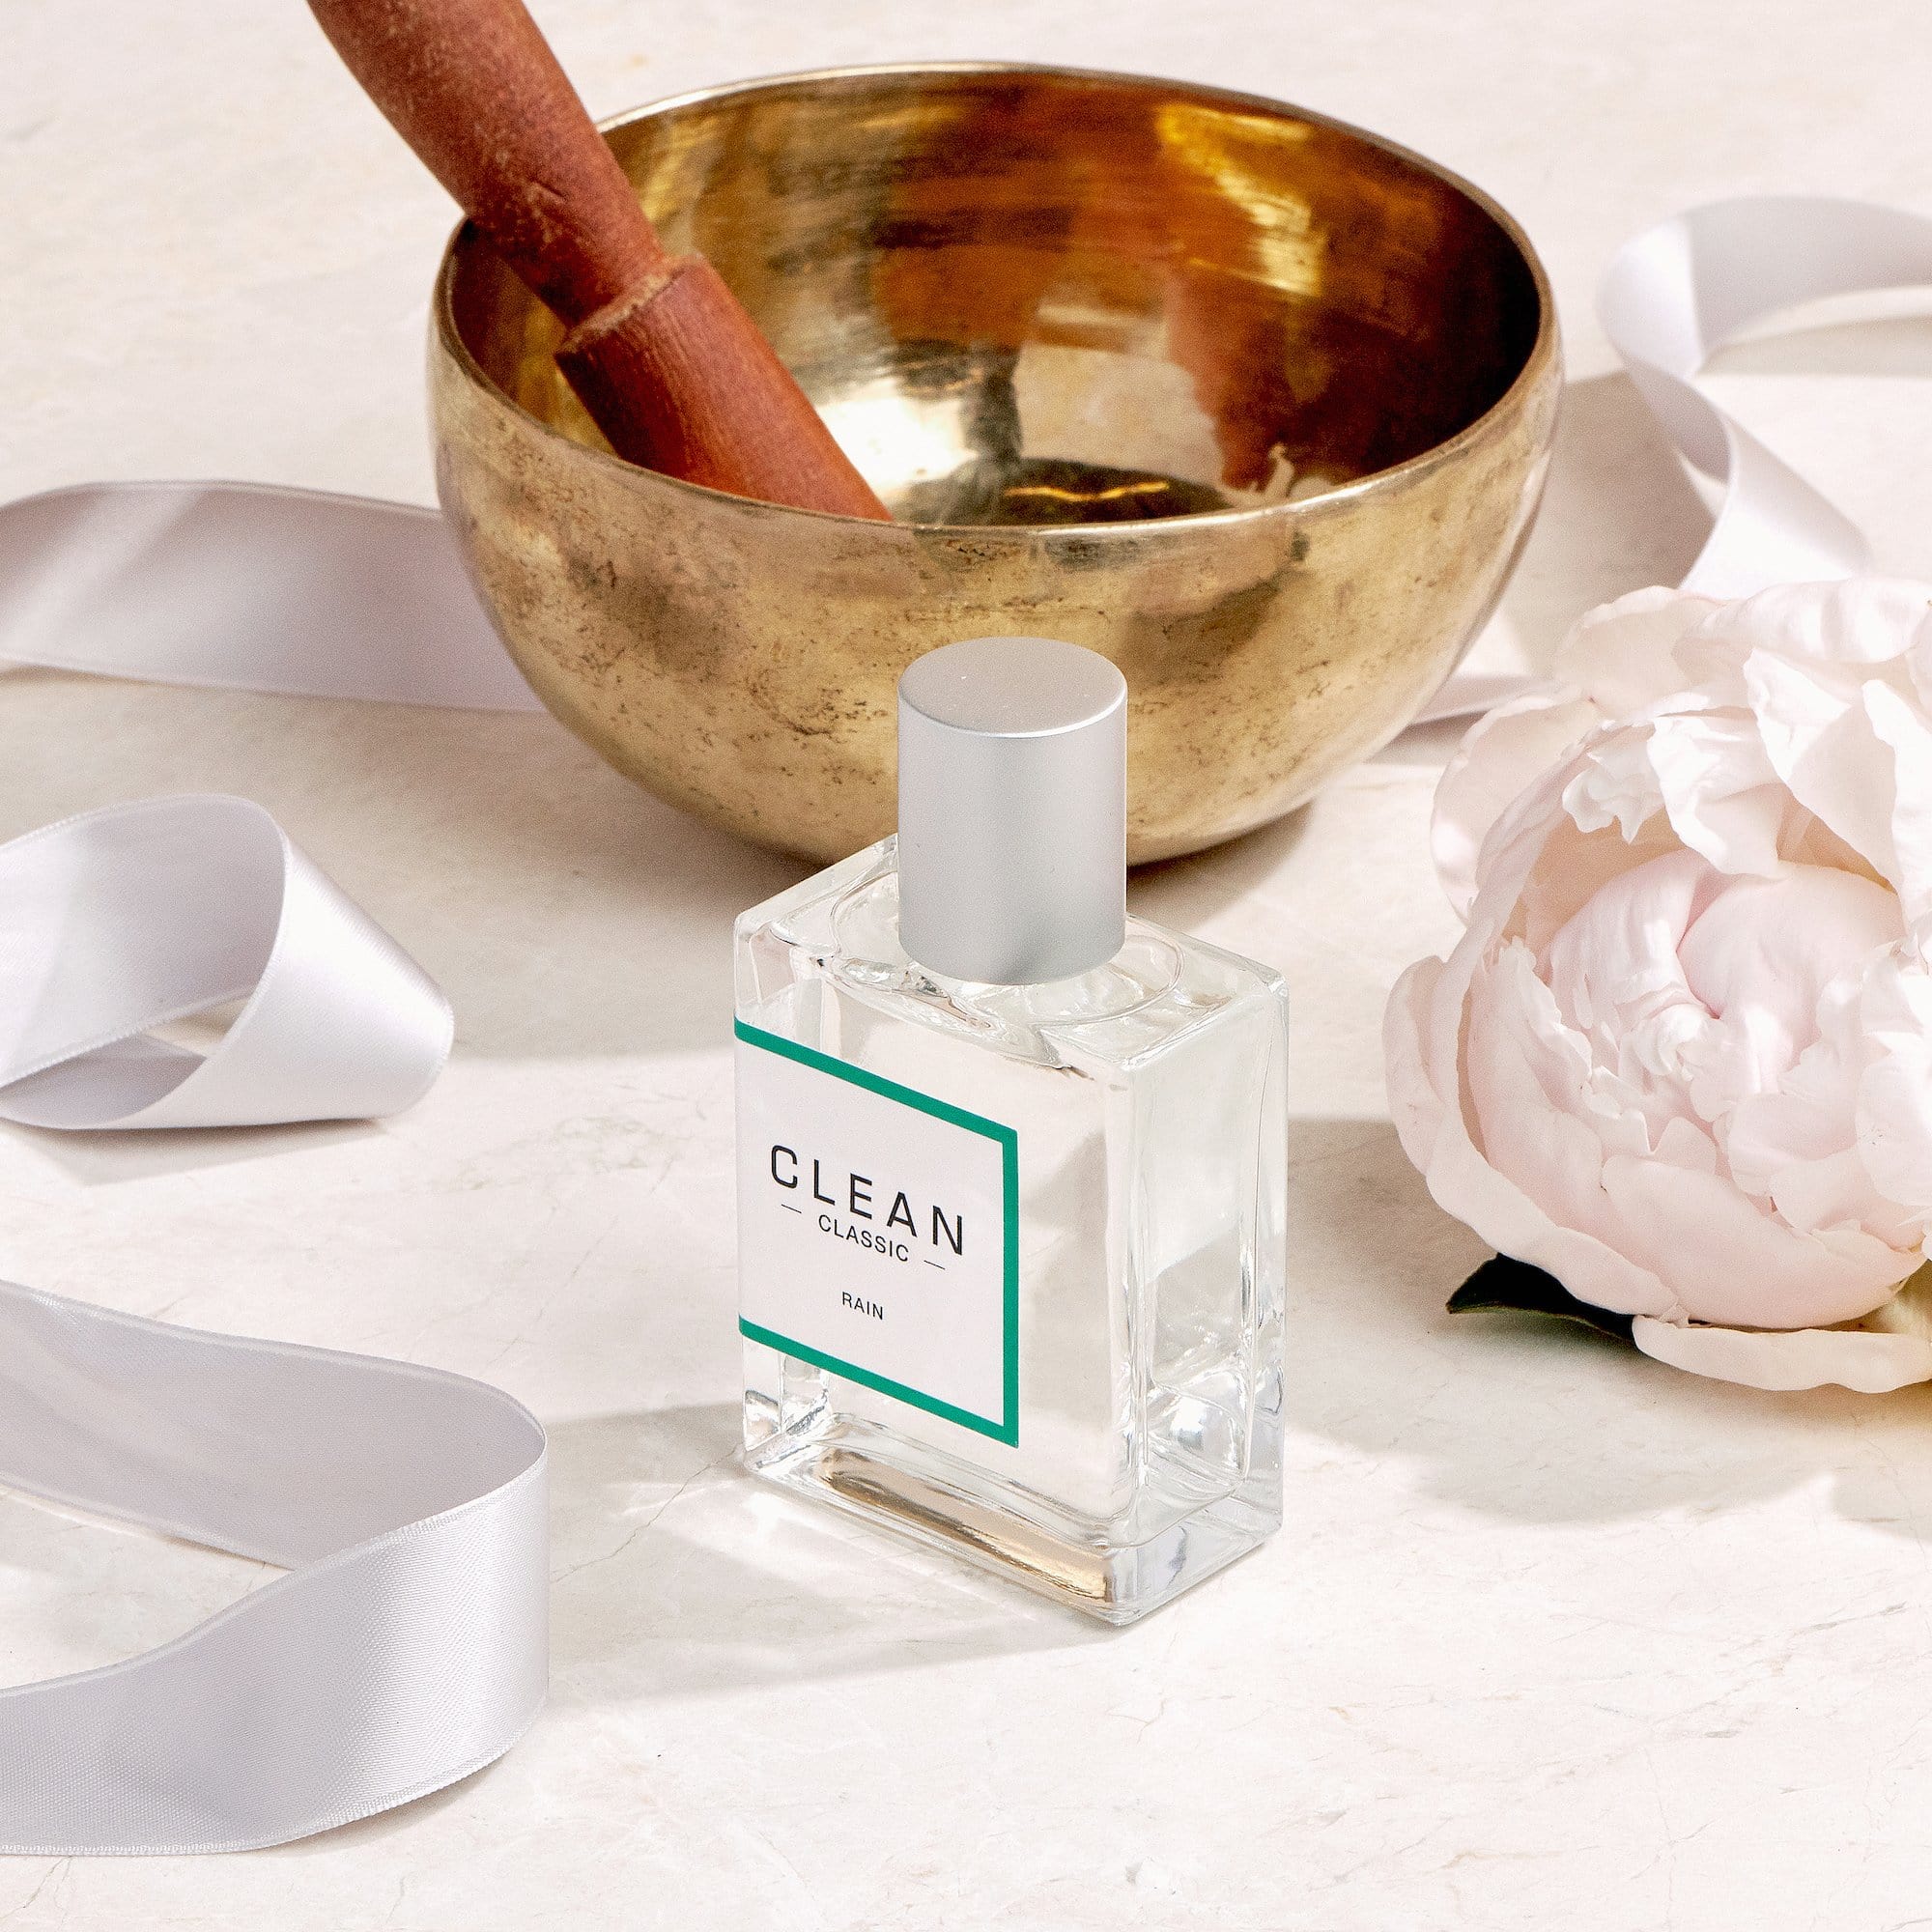 CLEAN CLASSIC Rain Fragrance – Three Sizes – CLEAN Beauty Collective